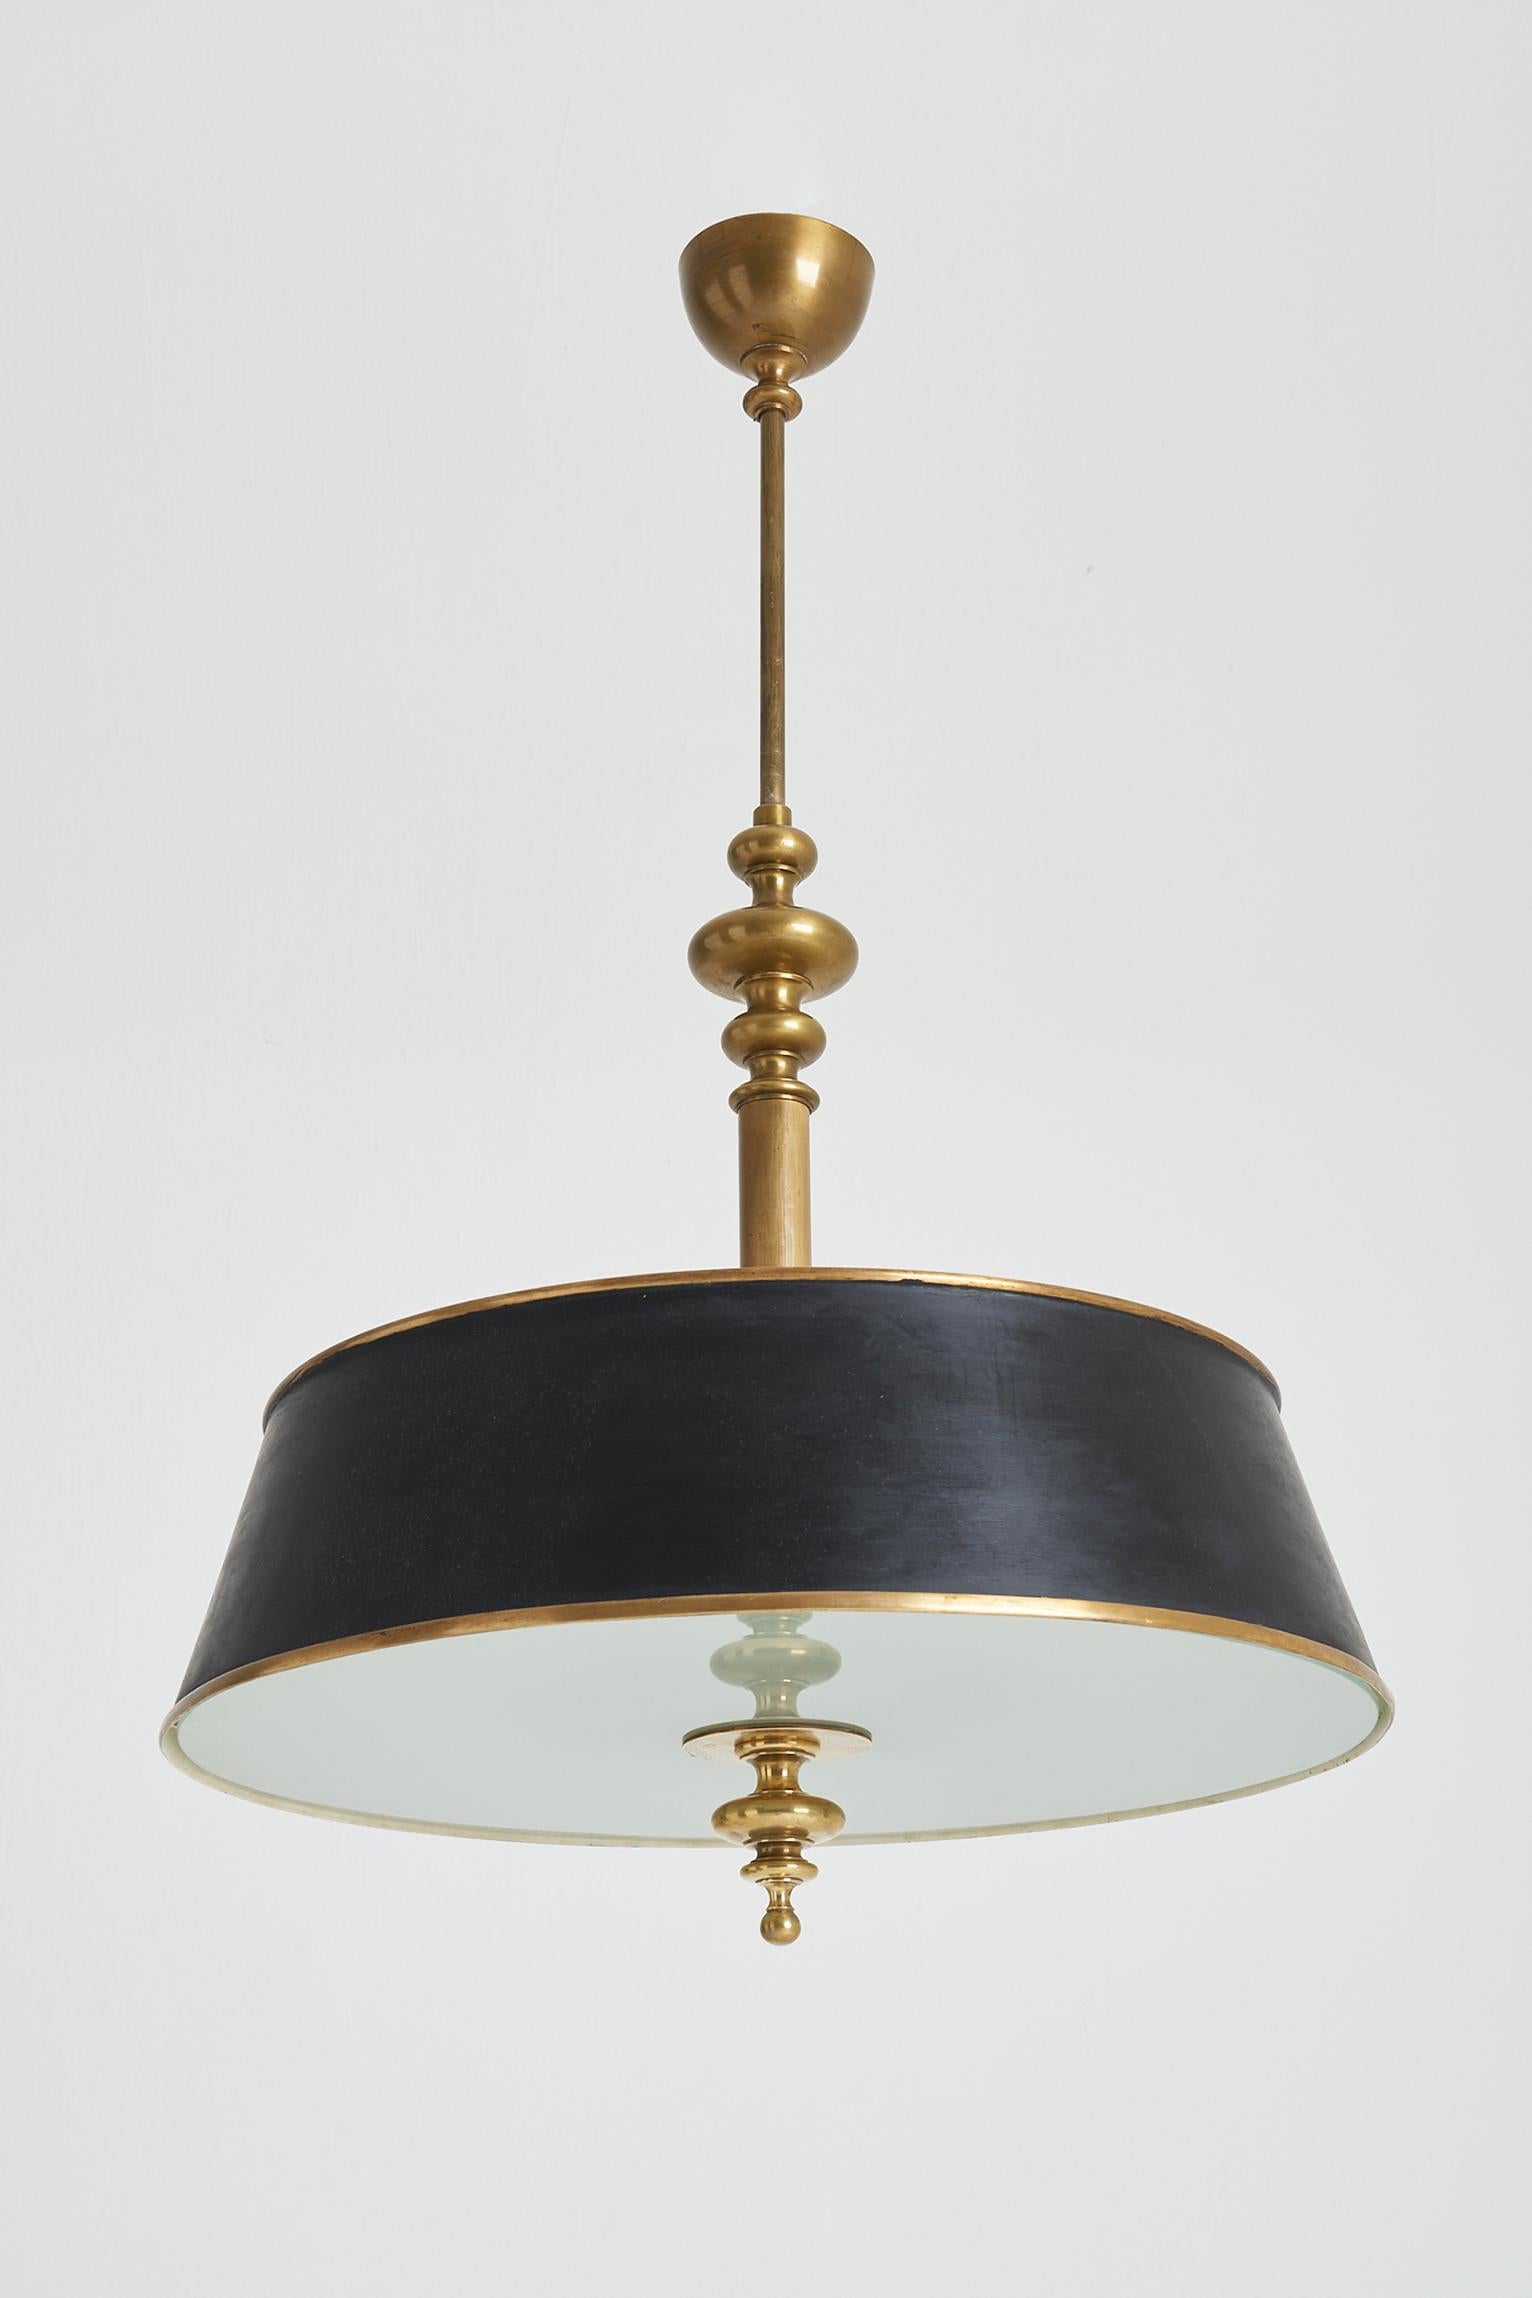 Swedish 1940s Brass and Glass Ceiling Light